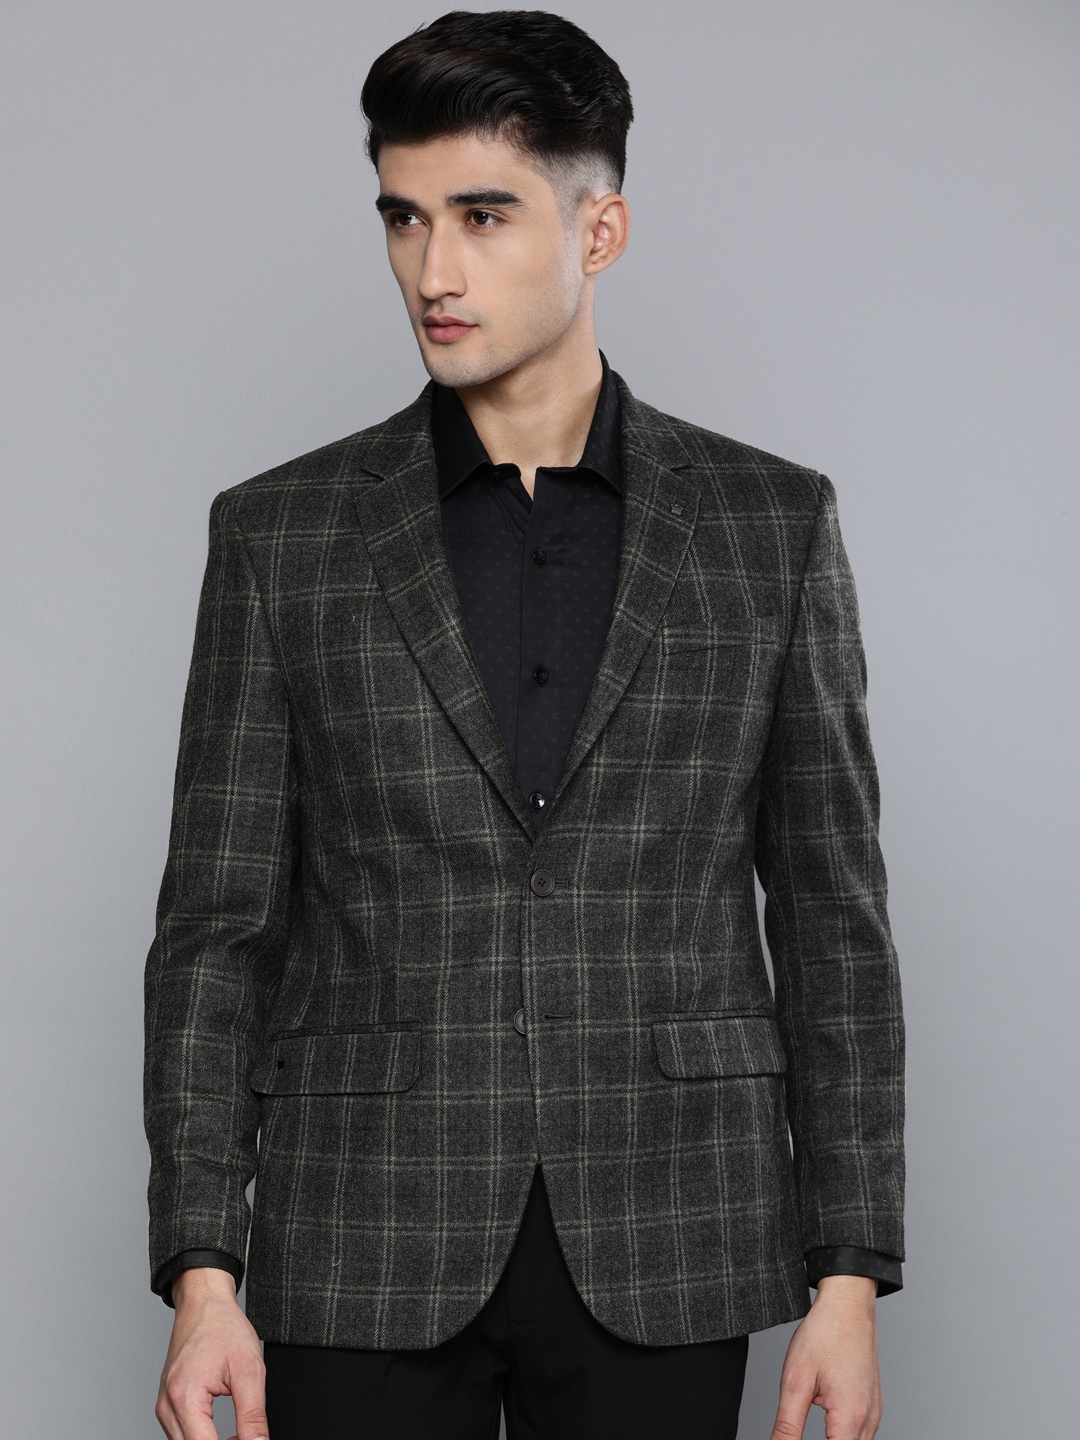 LOUIS PHILIPPE Solid Single Breasted Formal Men Blazer - Buy LOUIS PHILIPPE  Solid Single Breasted Formal Men Blazer Online at Best Prices in India